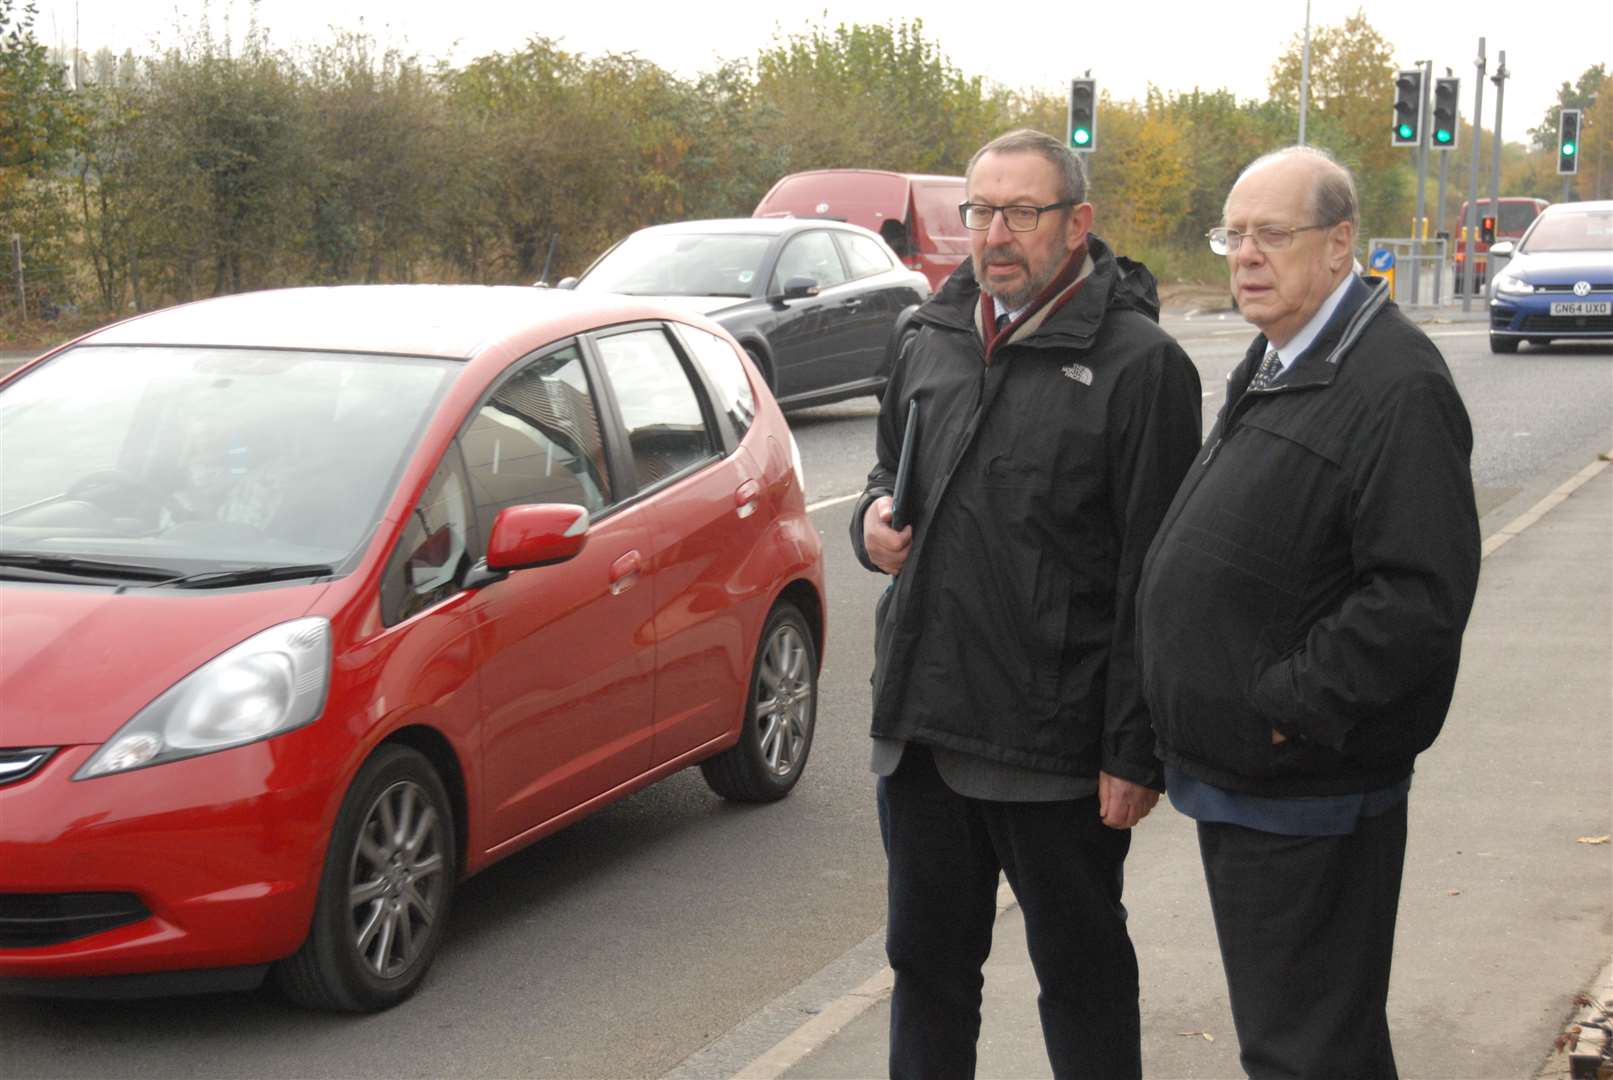 Cllrs Rob Bird and Dan Daley contemplate the traffic in Maidstone